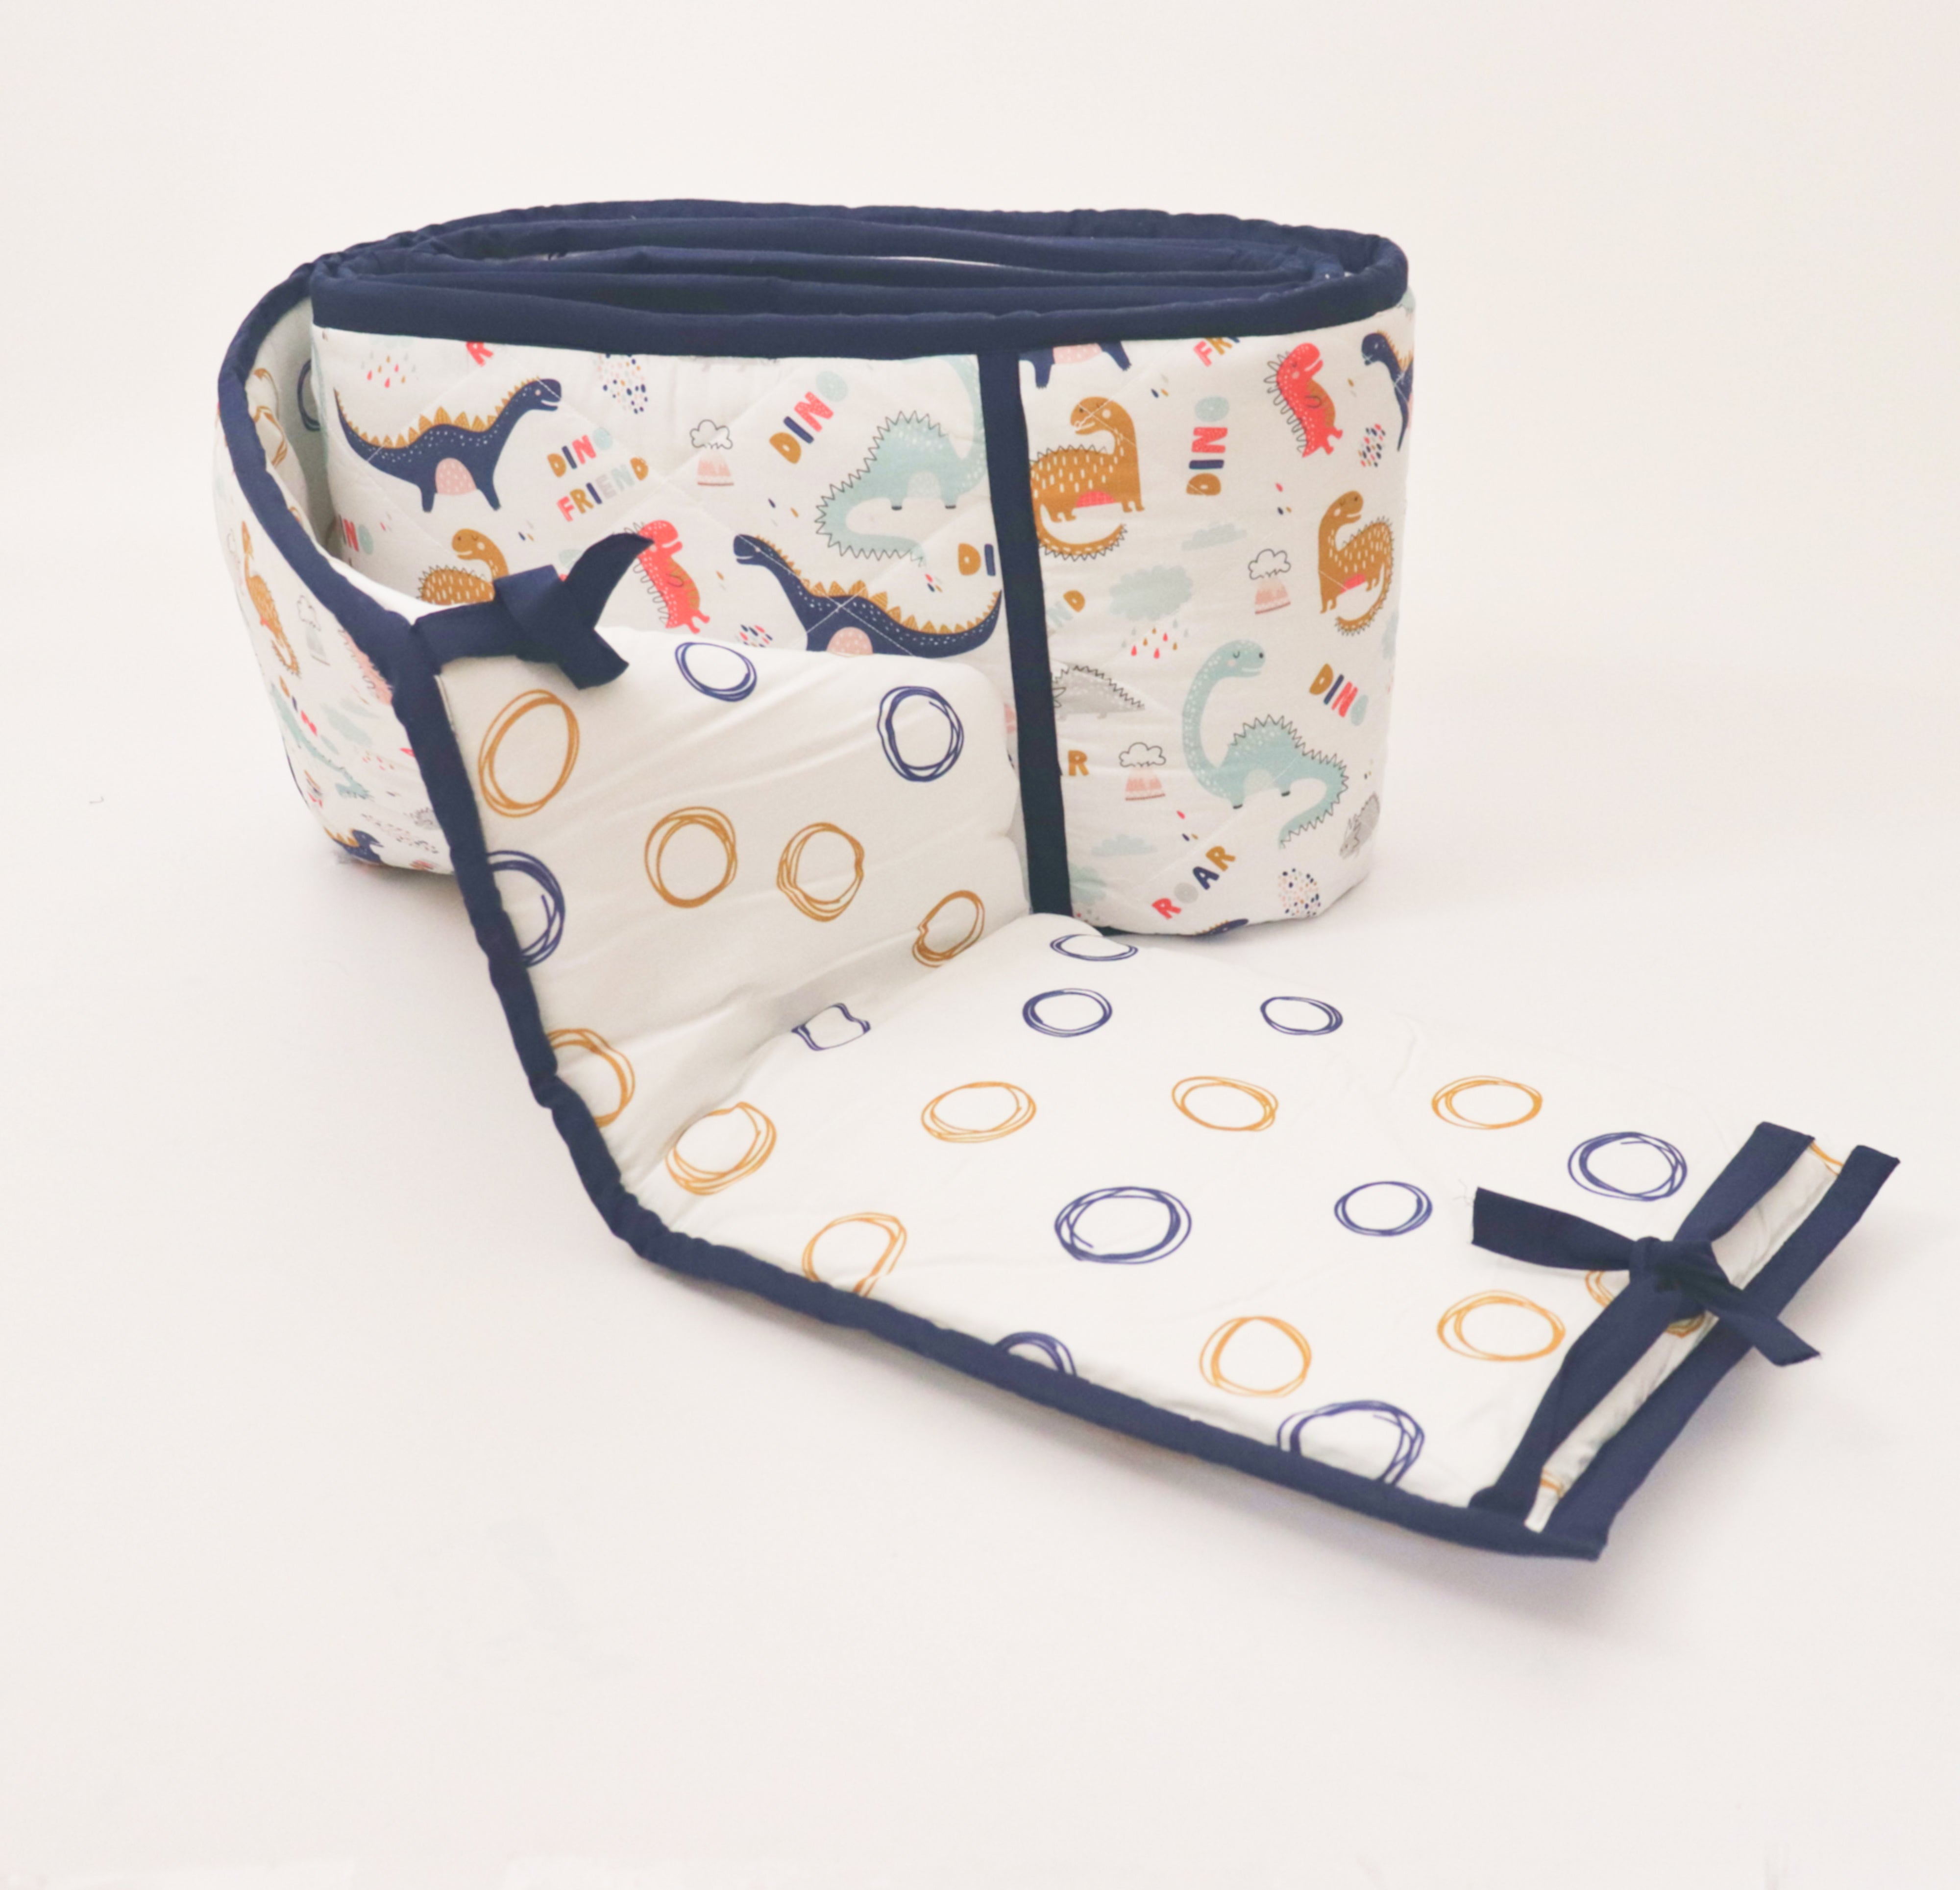 Dino Friend - Quilted Cot Bumper